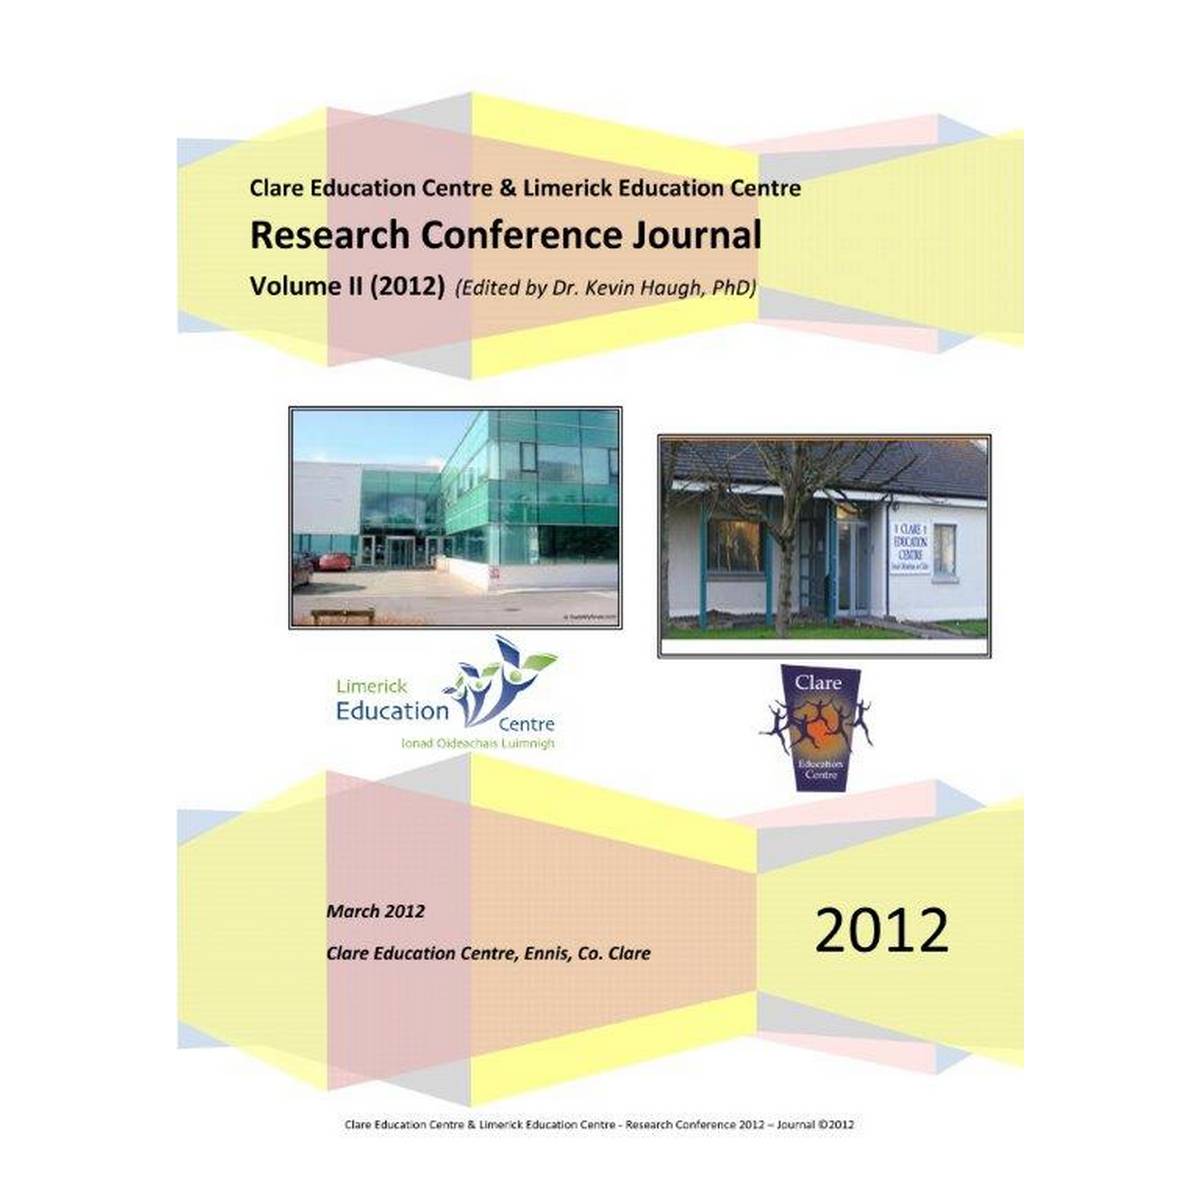 Research Conference 2012 Journal Vol II - Clare & Limerick Education Centres